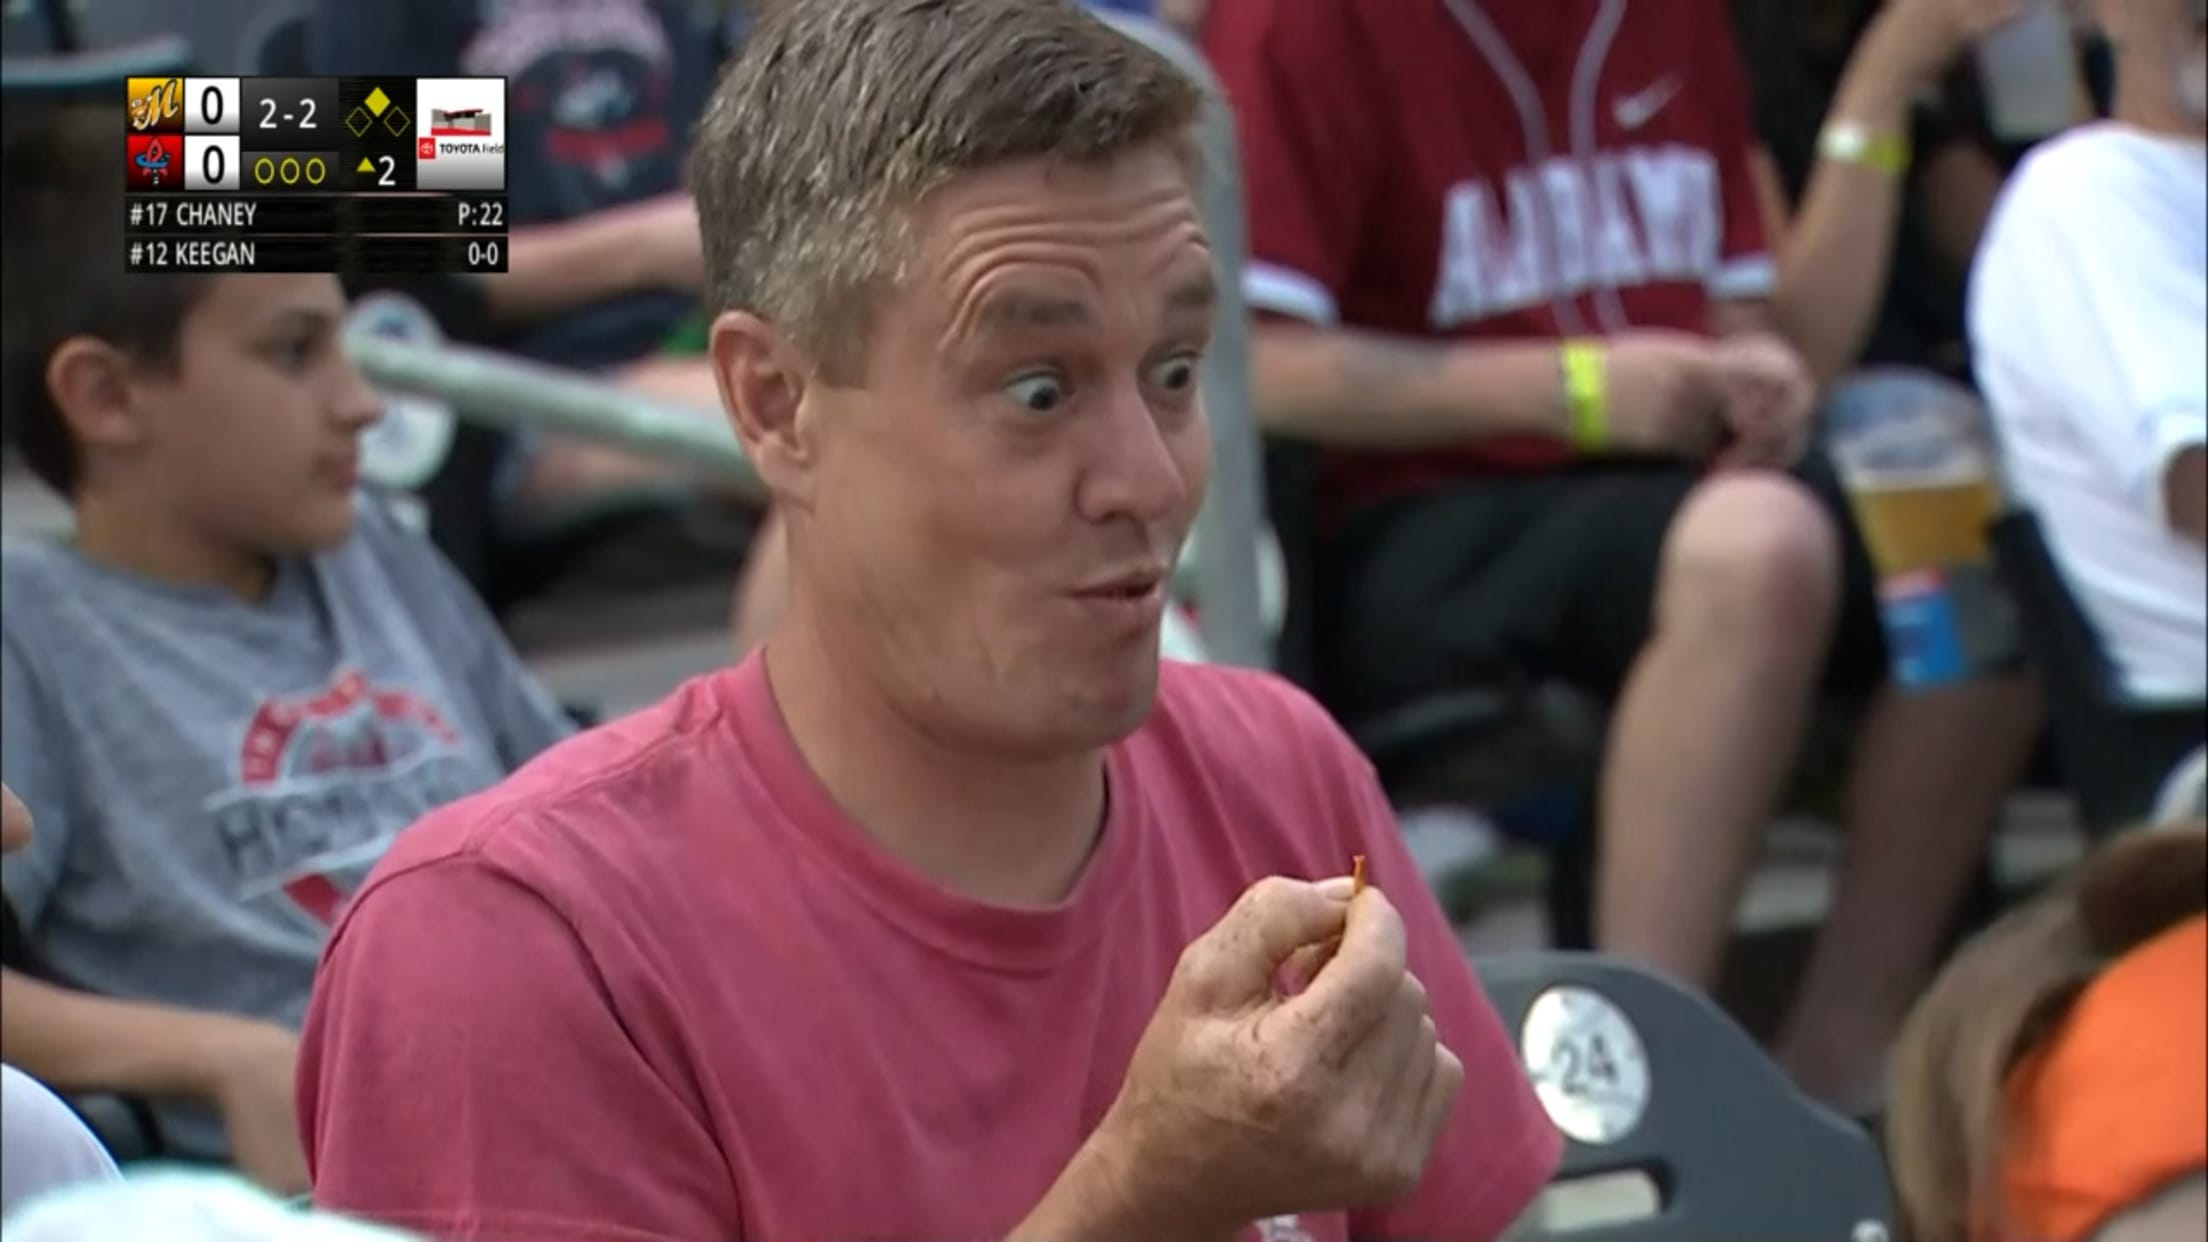 A fan reacts after eating a cicada at a Minor League game